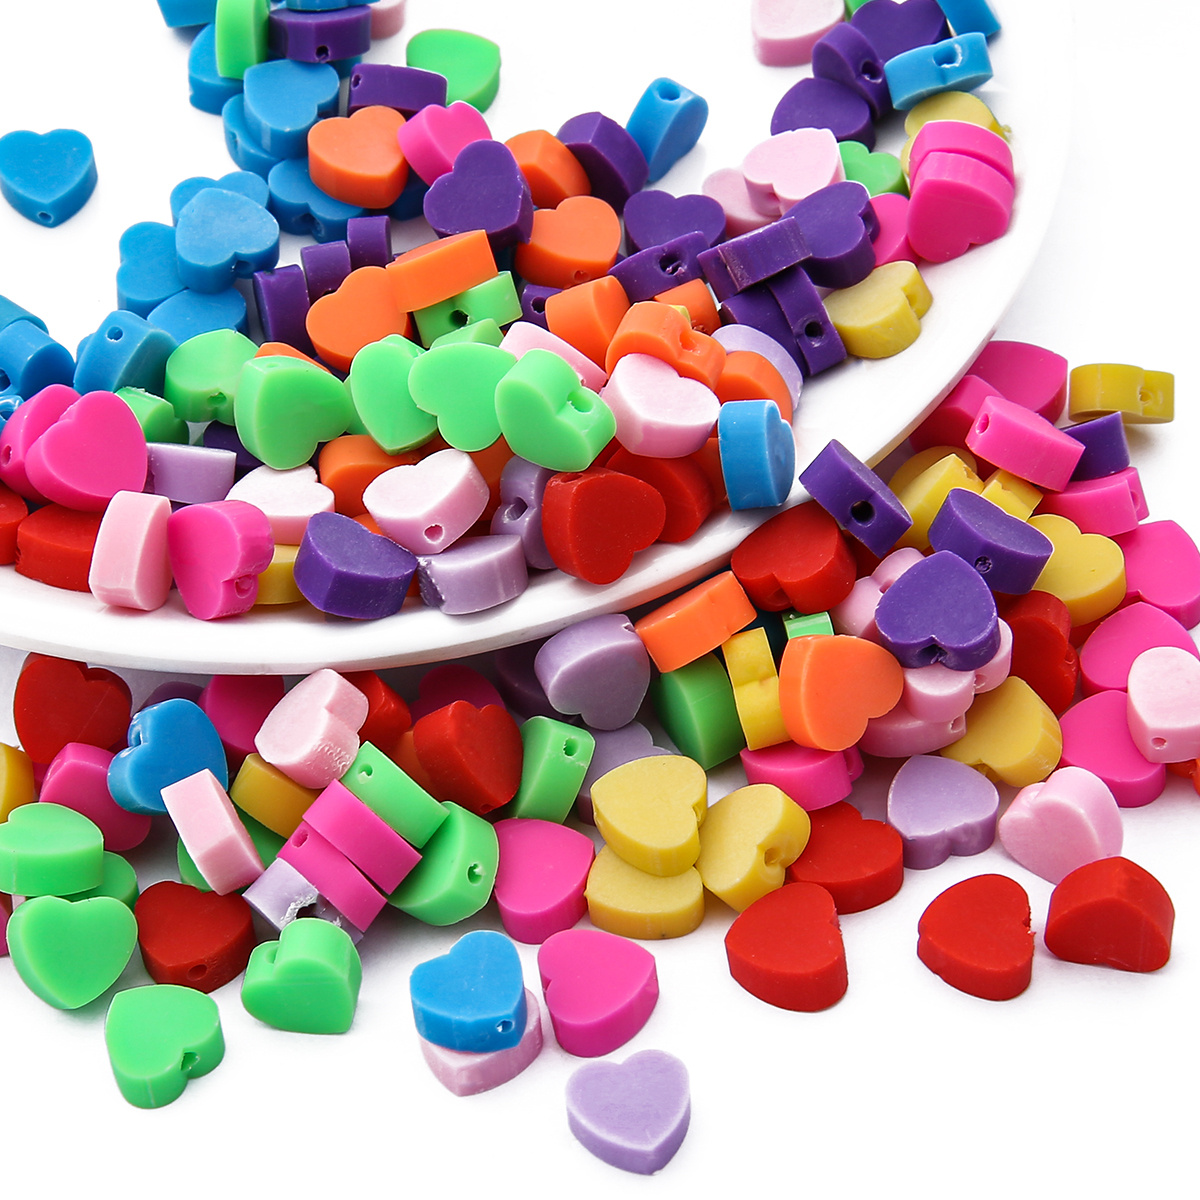 30pcs/lot Multicolor Heart Polymer Clay Beads Cute Love Spacer Beads DIY  Jewelry